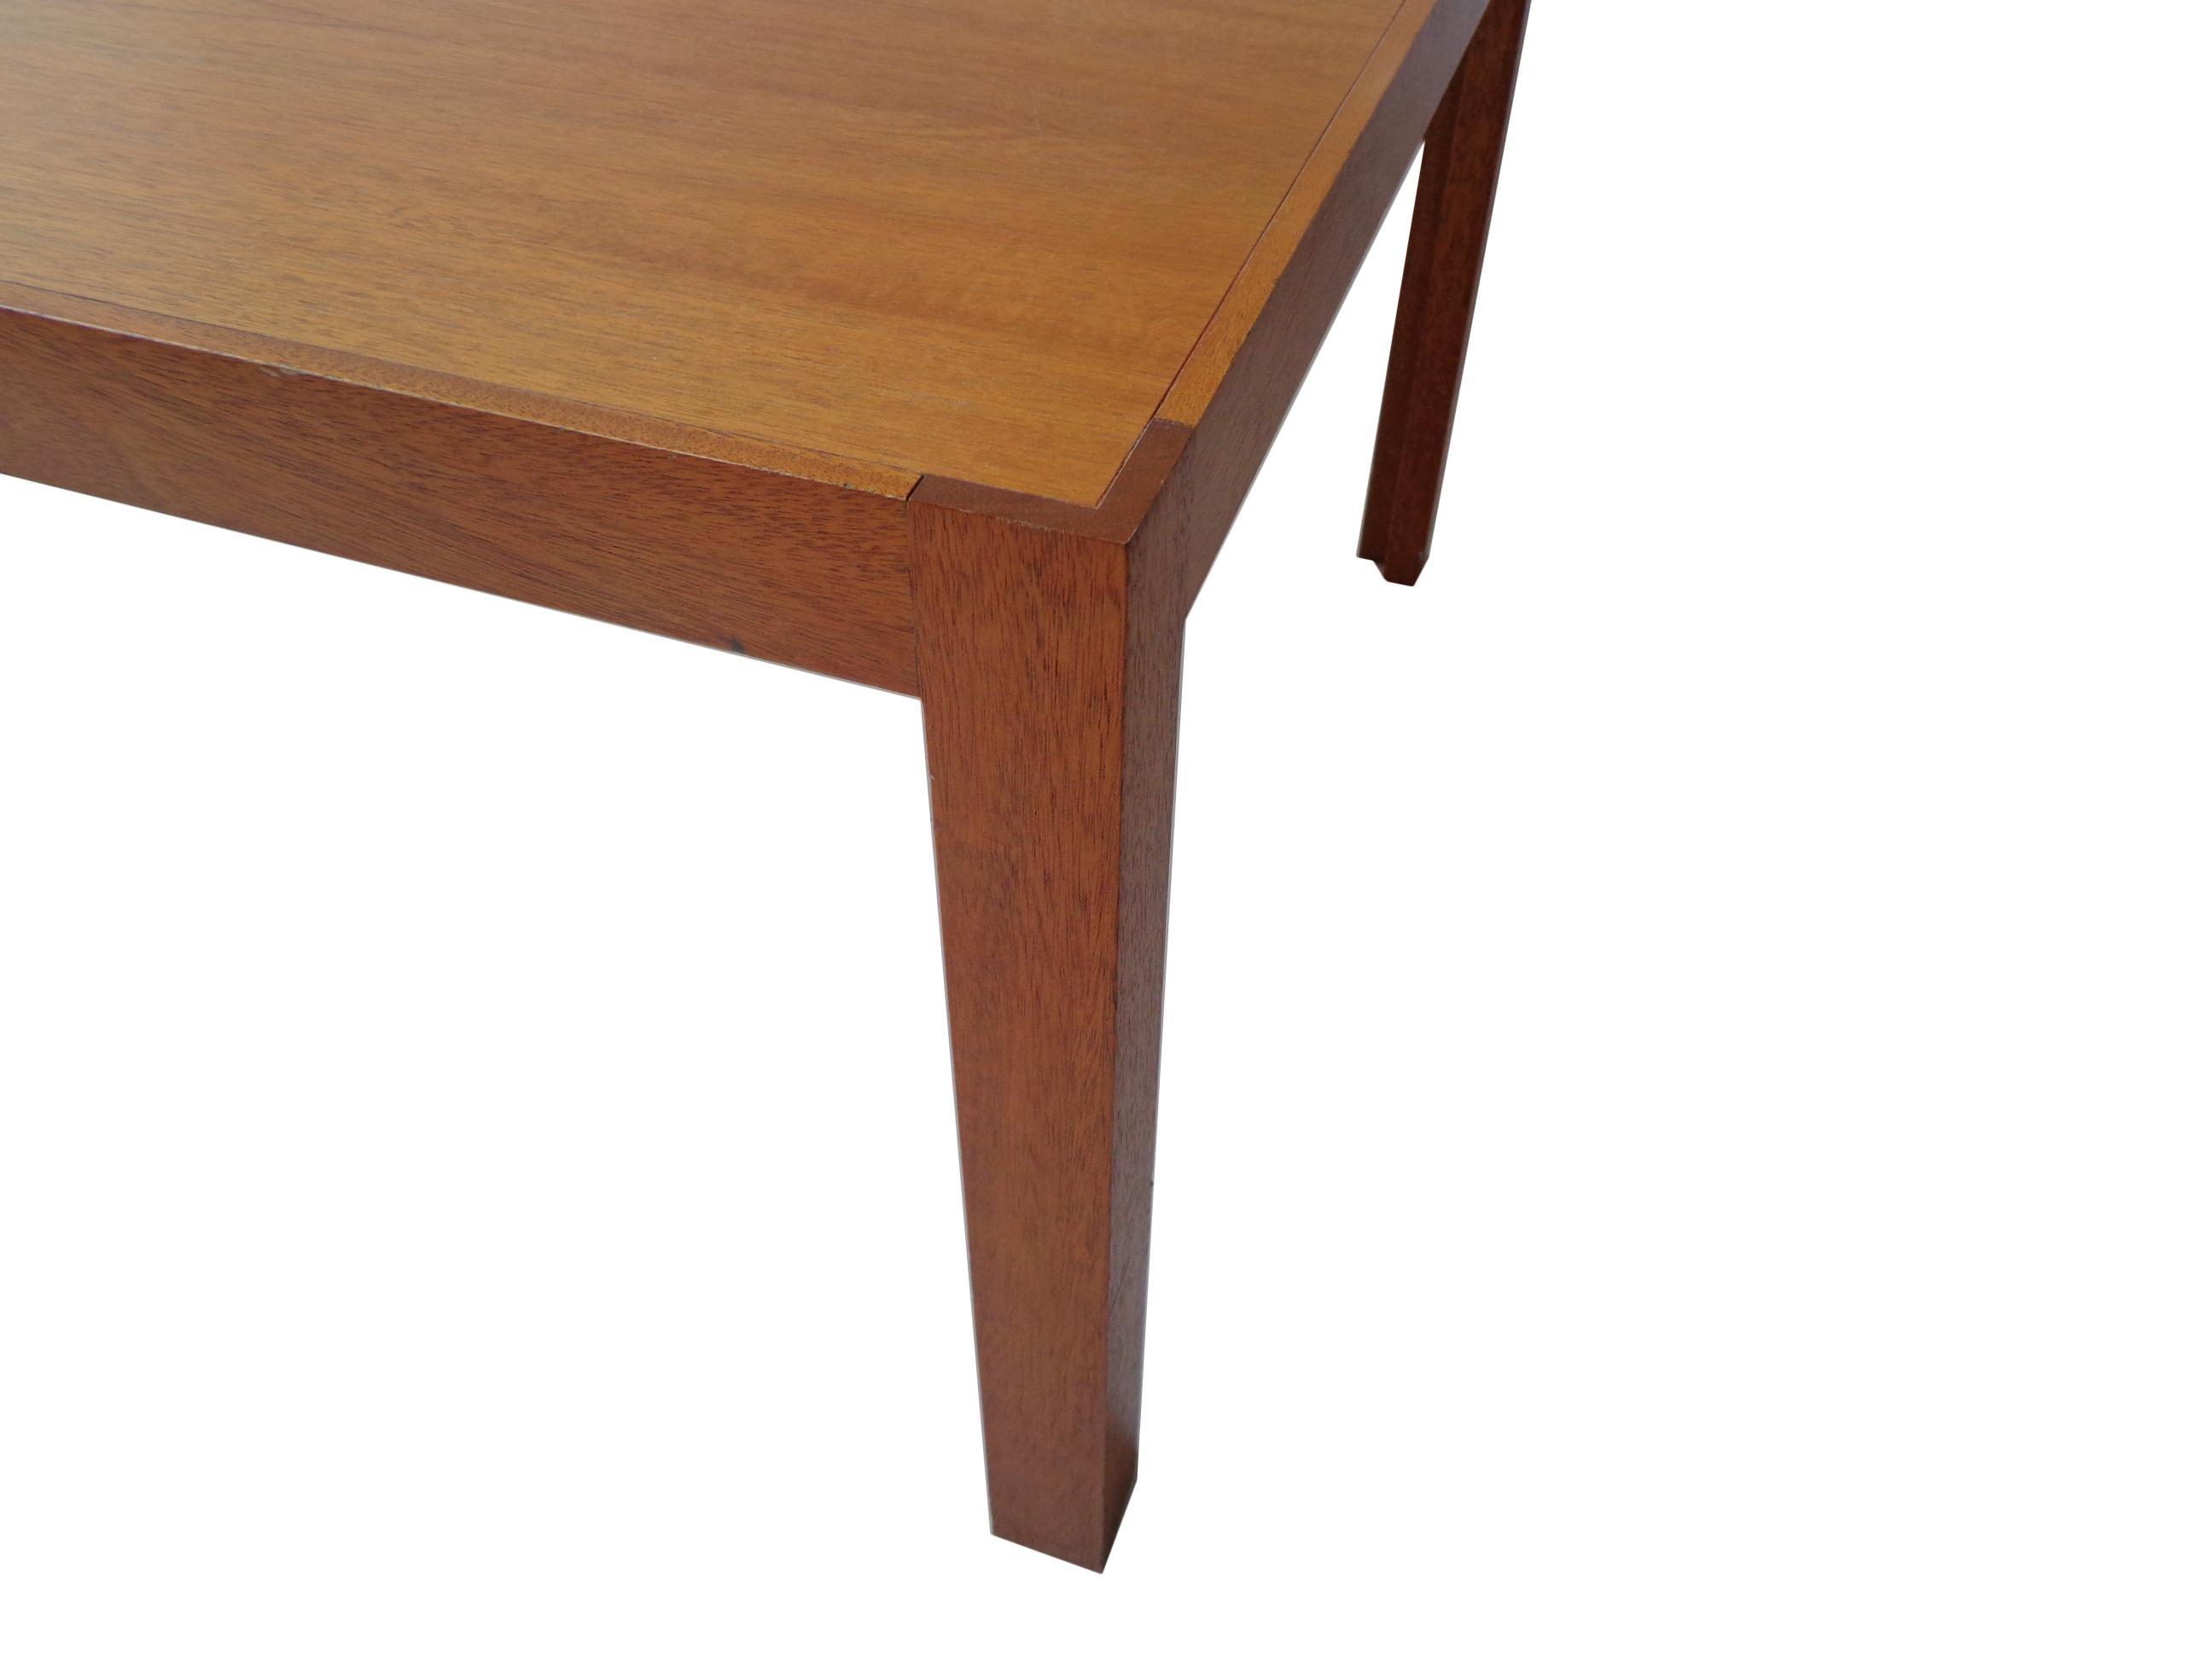 This coffee or sidetable, model Kongeserie is made in mahogany. Original and in very good condition.
Rud Thygesen & Johnny Sørensen won in 1969 1st prize in a competition held by the Copenhagen Cabinetmakers’ Guild. Then received King Frederik IX